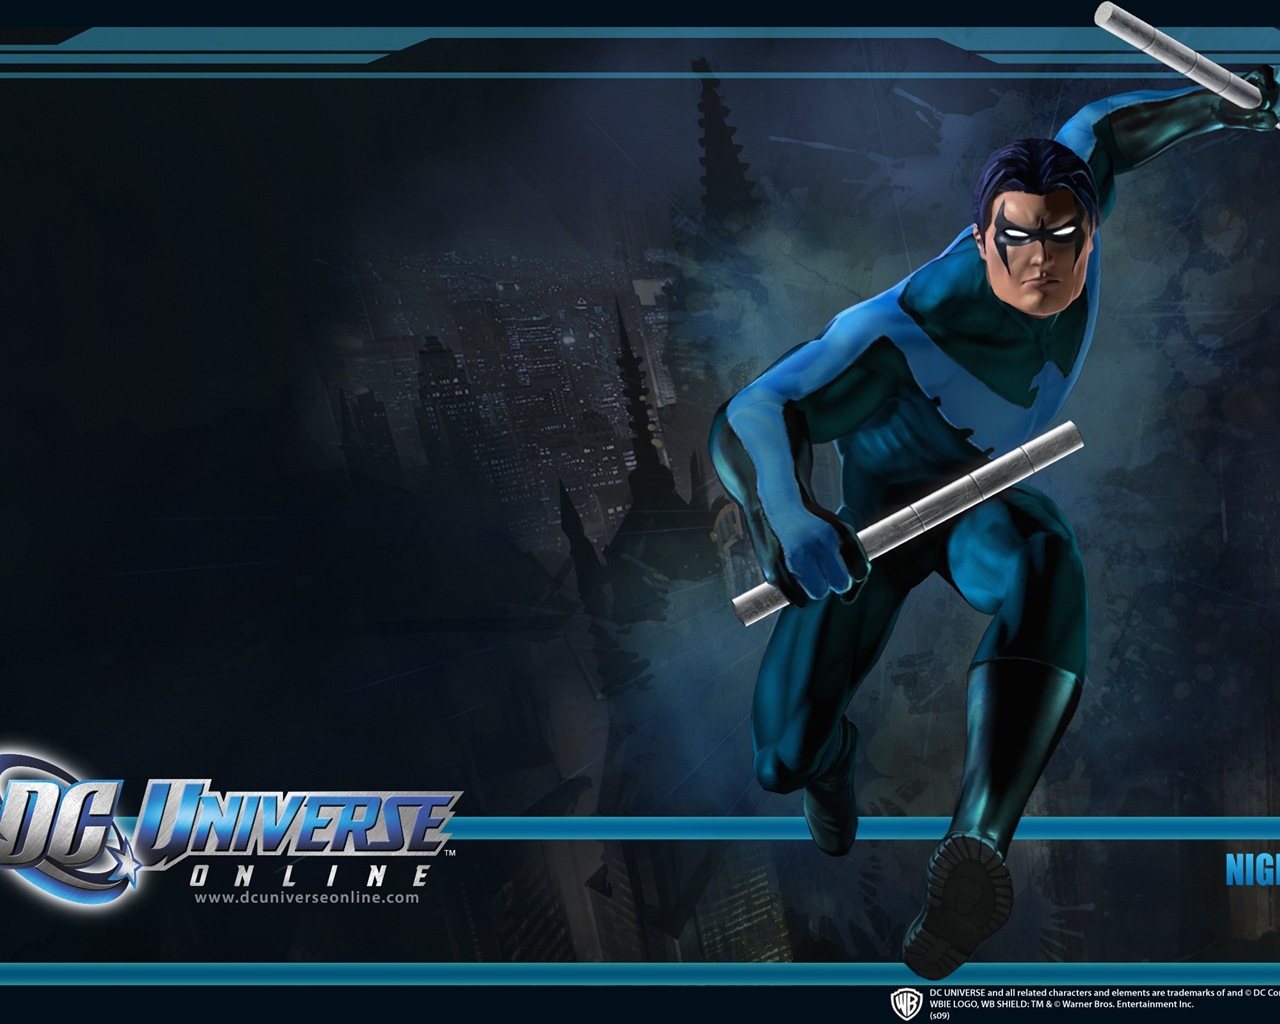 DC Universe Online HD game wallpapers #22 - 1280x1024